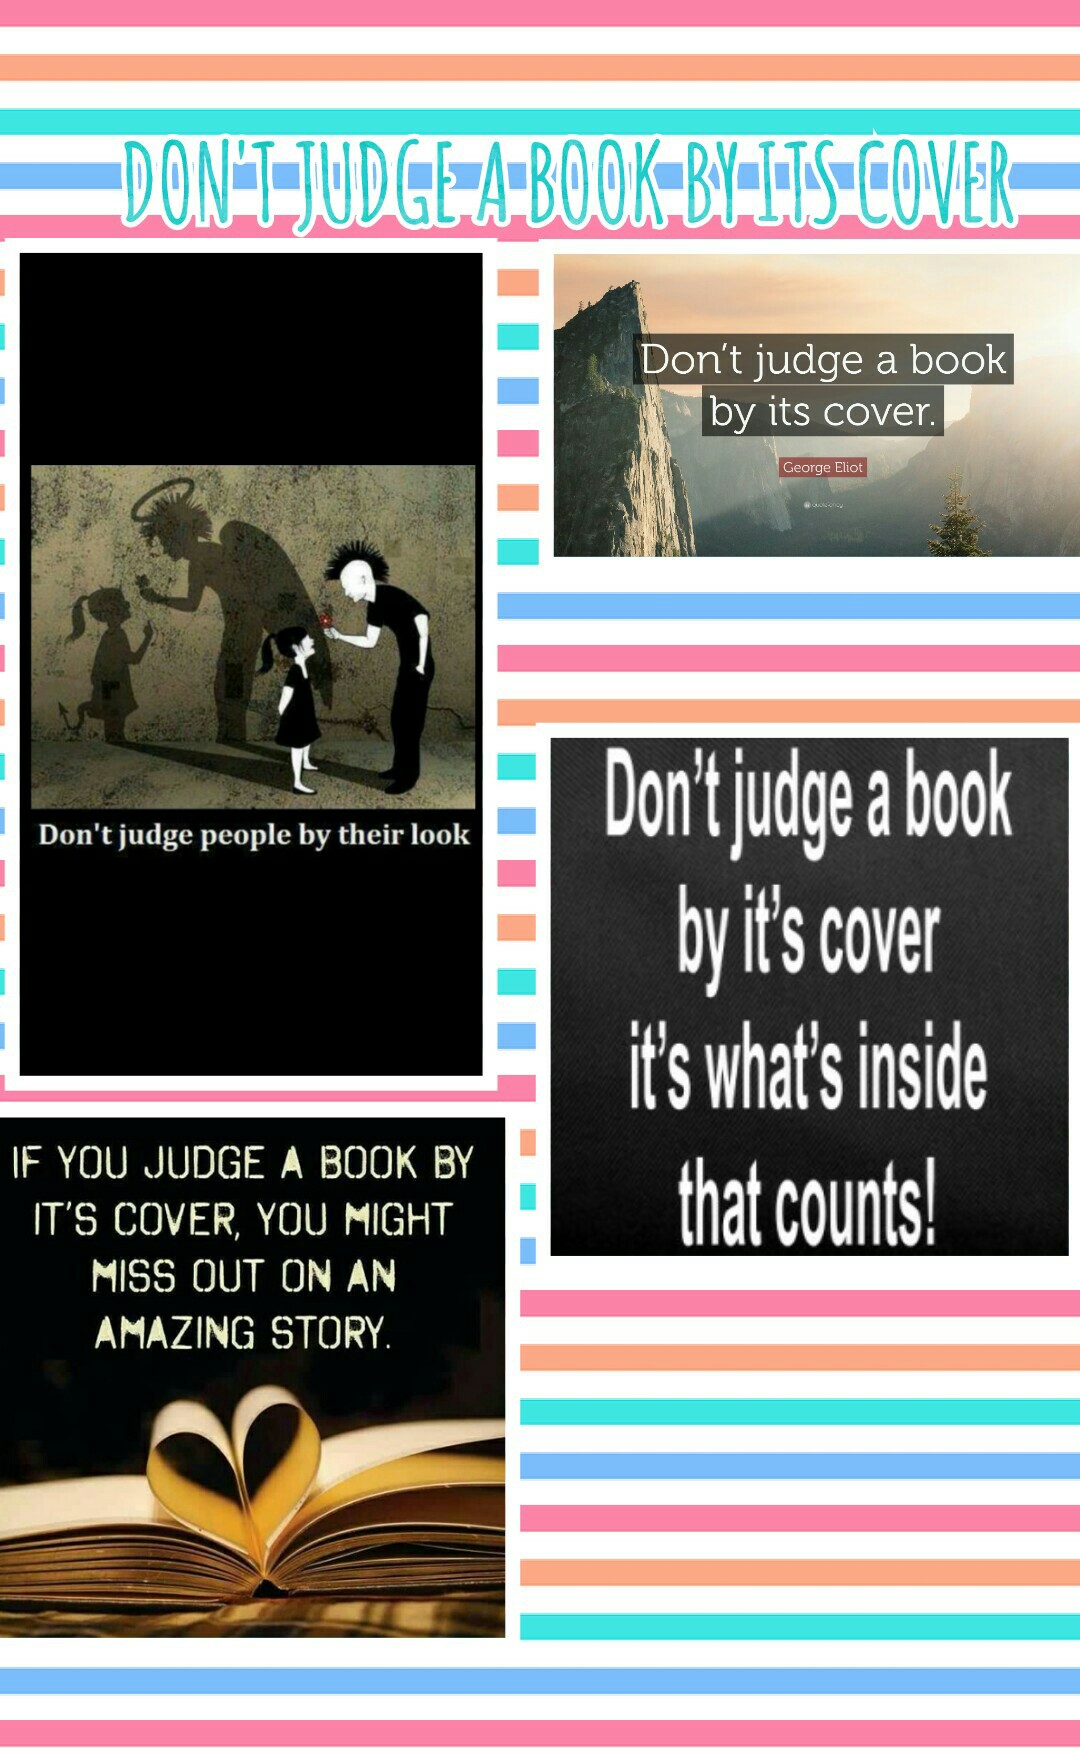 DON'T JUDGE A BOOK BY ITS COVER ITS THE INSIDE THAT COUNTS